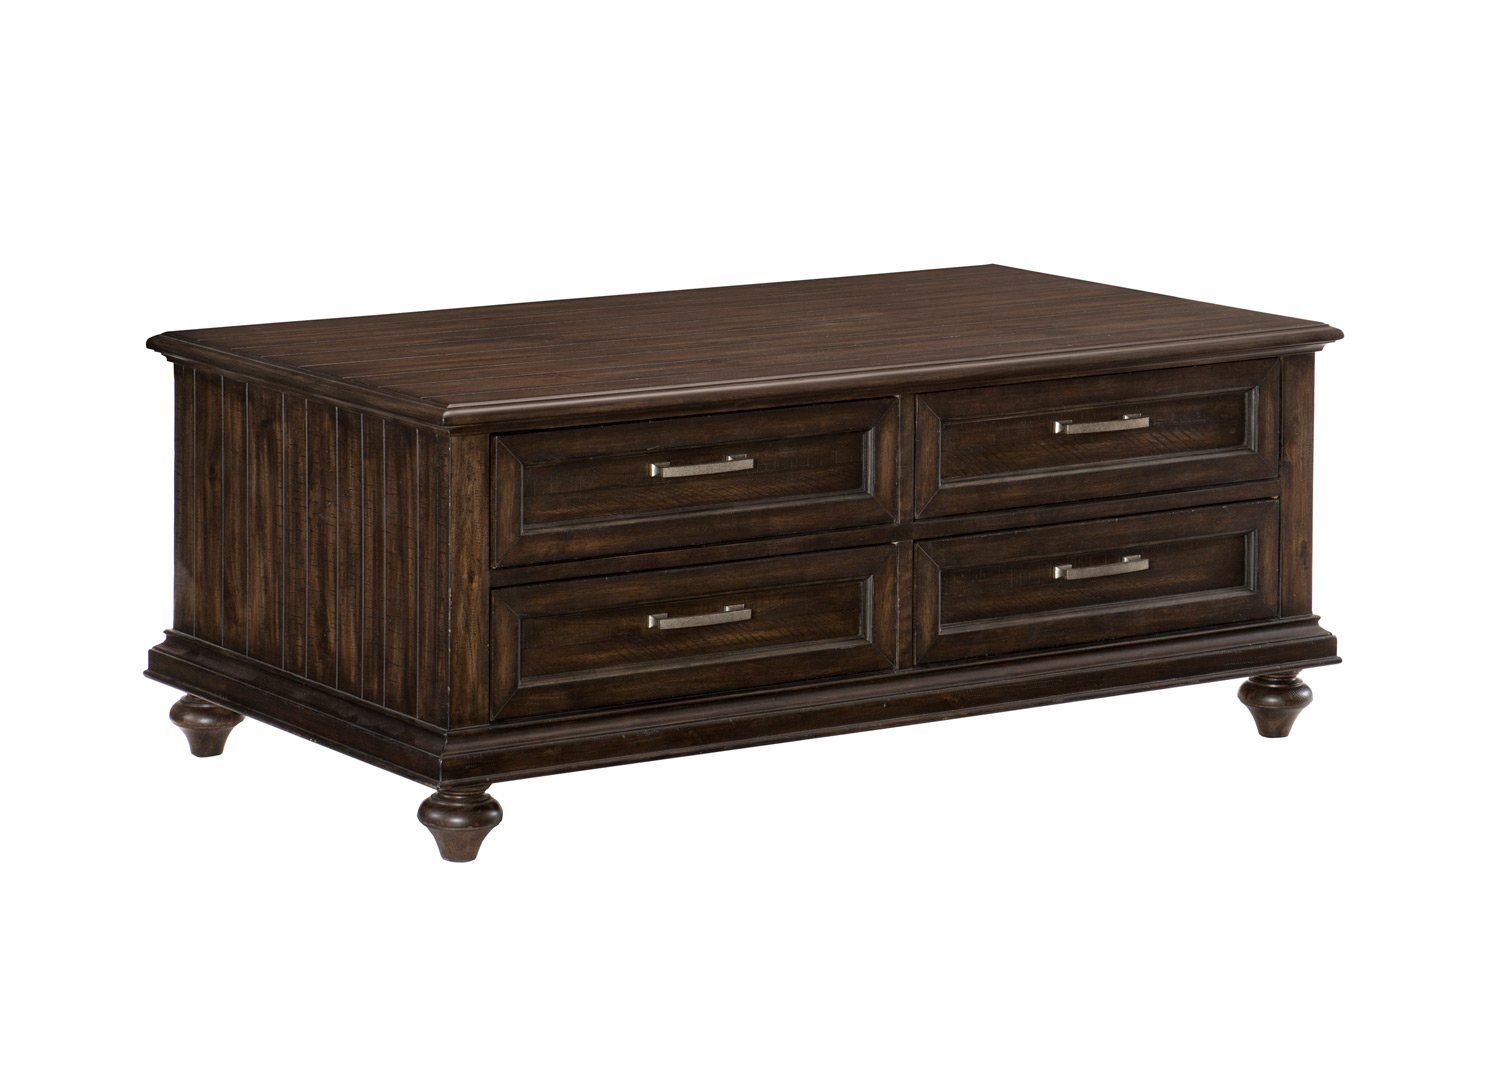 Homelegance Cardano Cocktail Table with Four Functional Drawer - Driftwood Charcoal